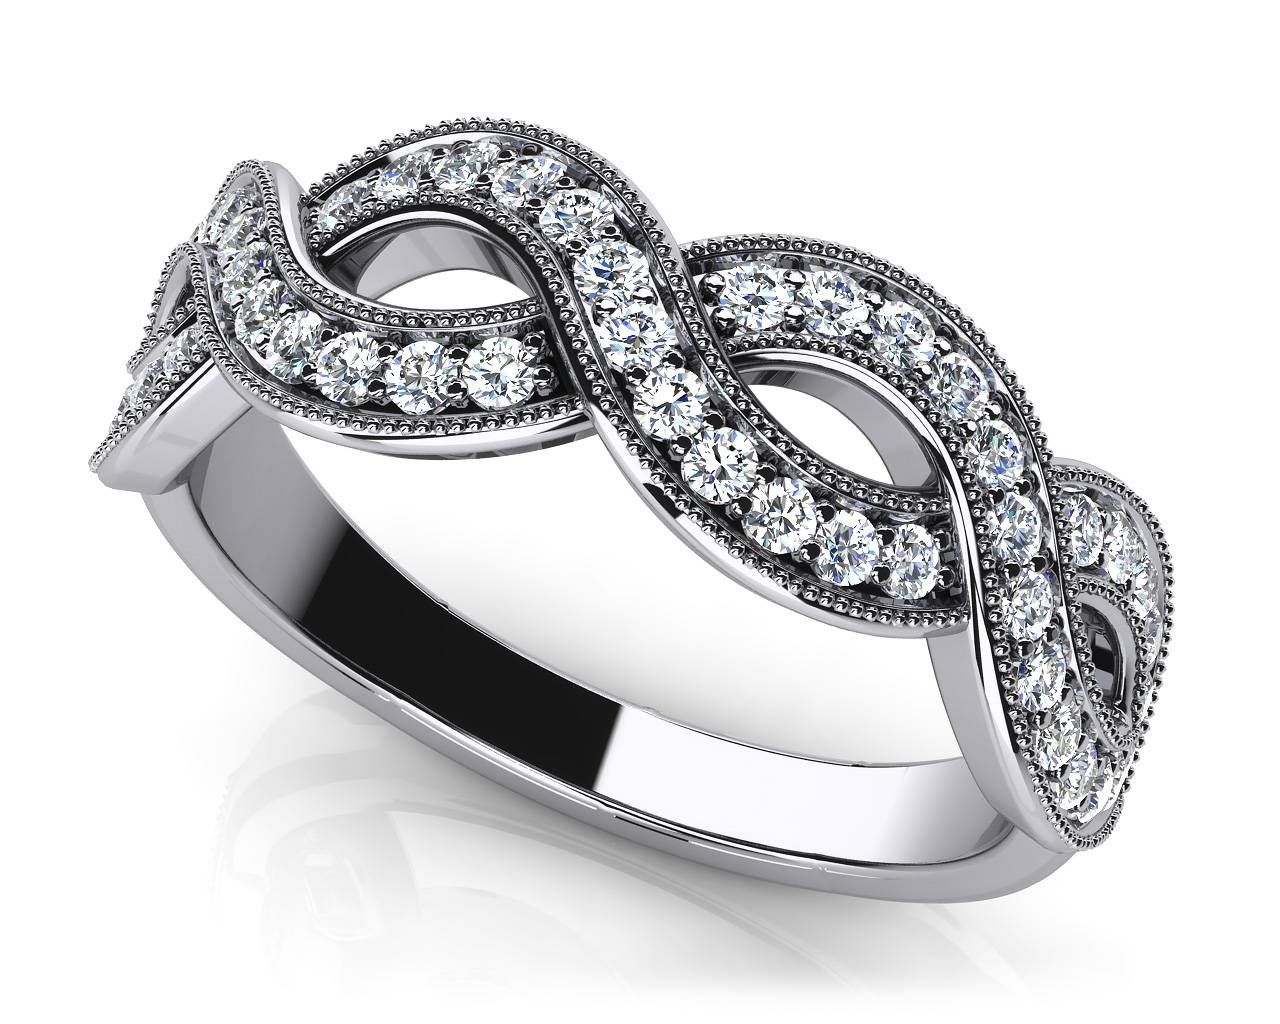 Design Your Own Diamond Anniversary Ring & Eternity Ring Regarding Most Current 25th Anniversary Rings (View 3 of 25)